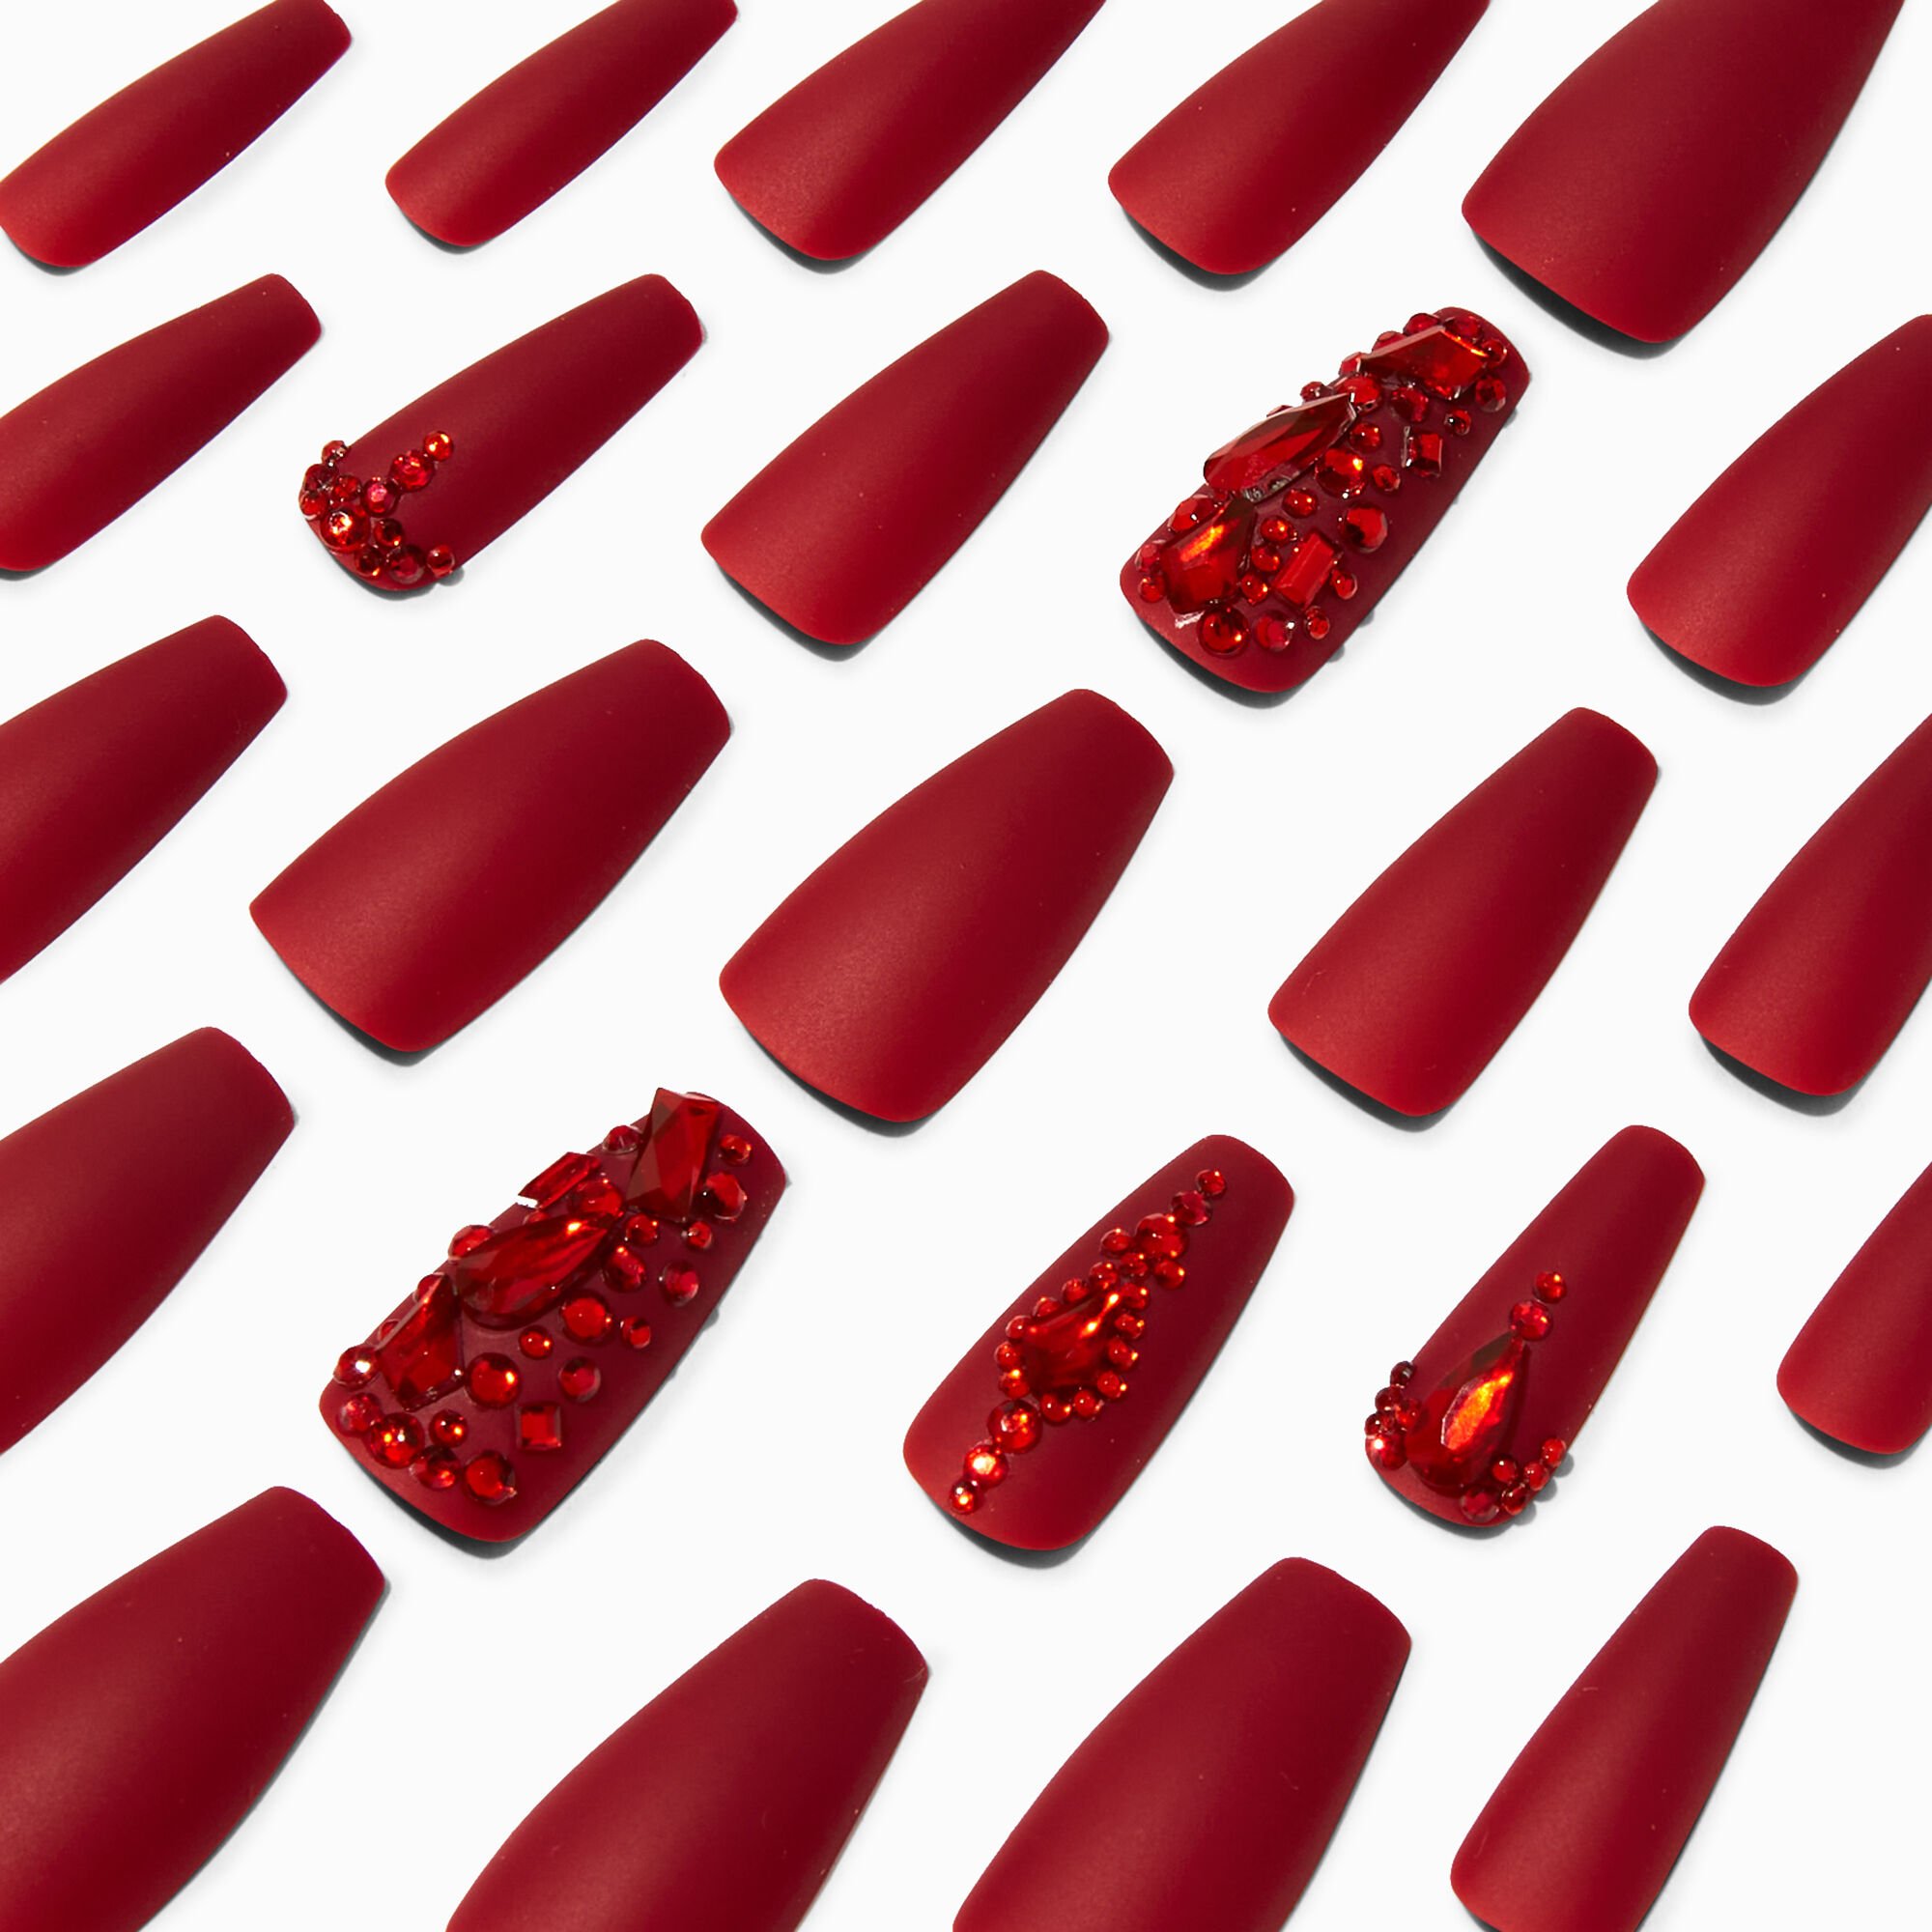 View Claires Bling Squareletto Vegan Faux Nail Set 24 Pack Red information